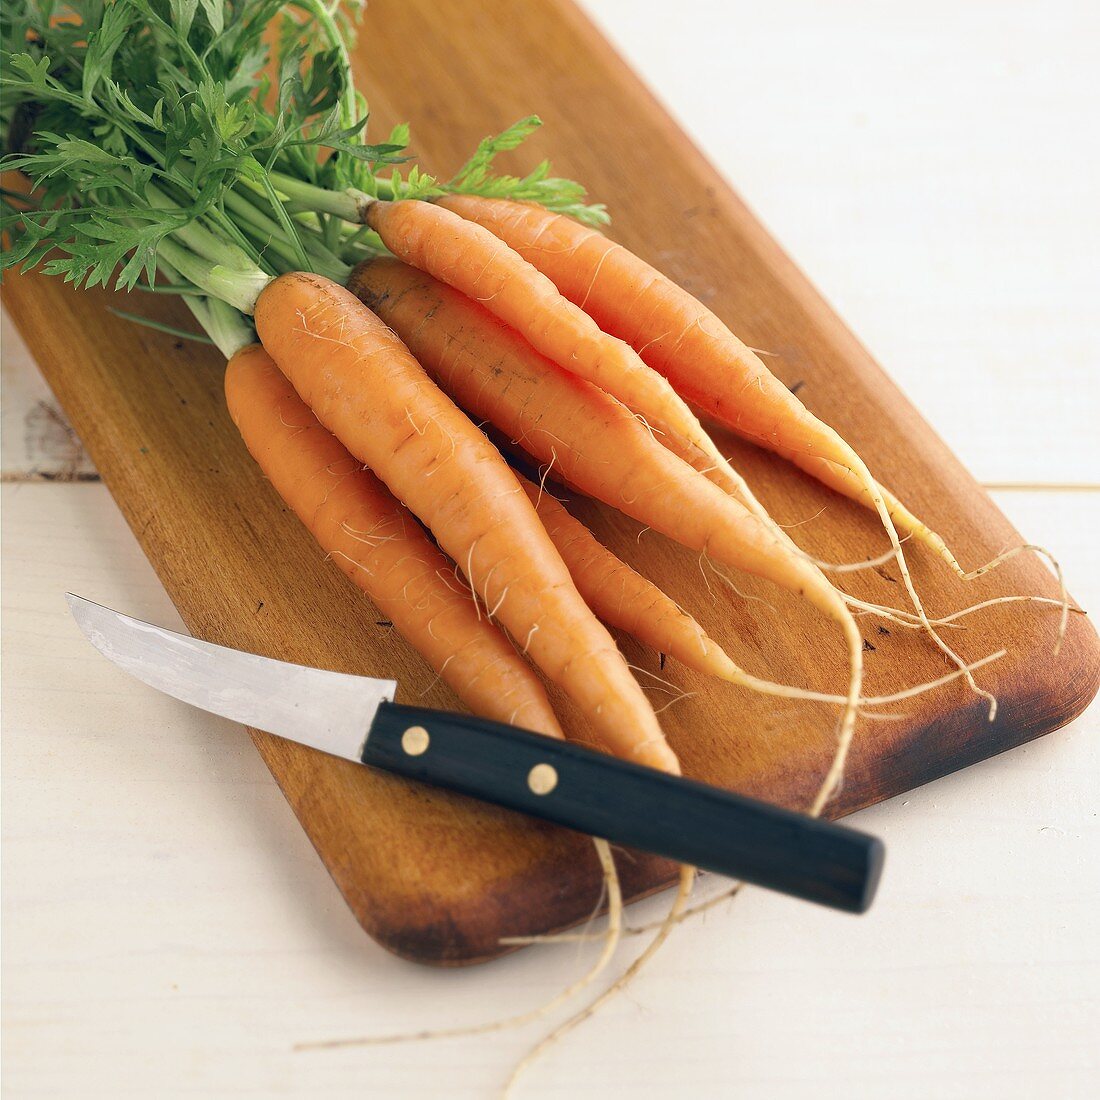 Fresh carrots on chopping board with knife